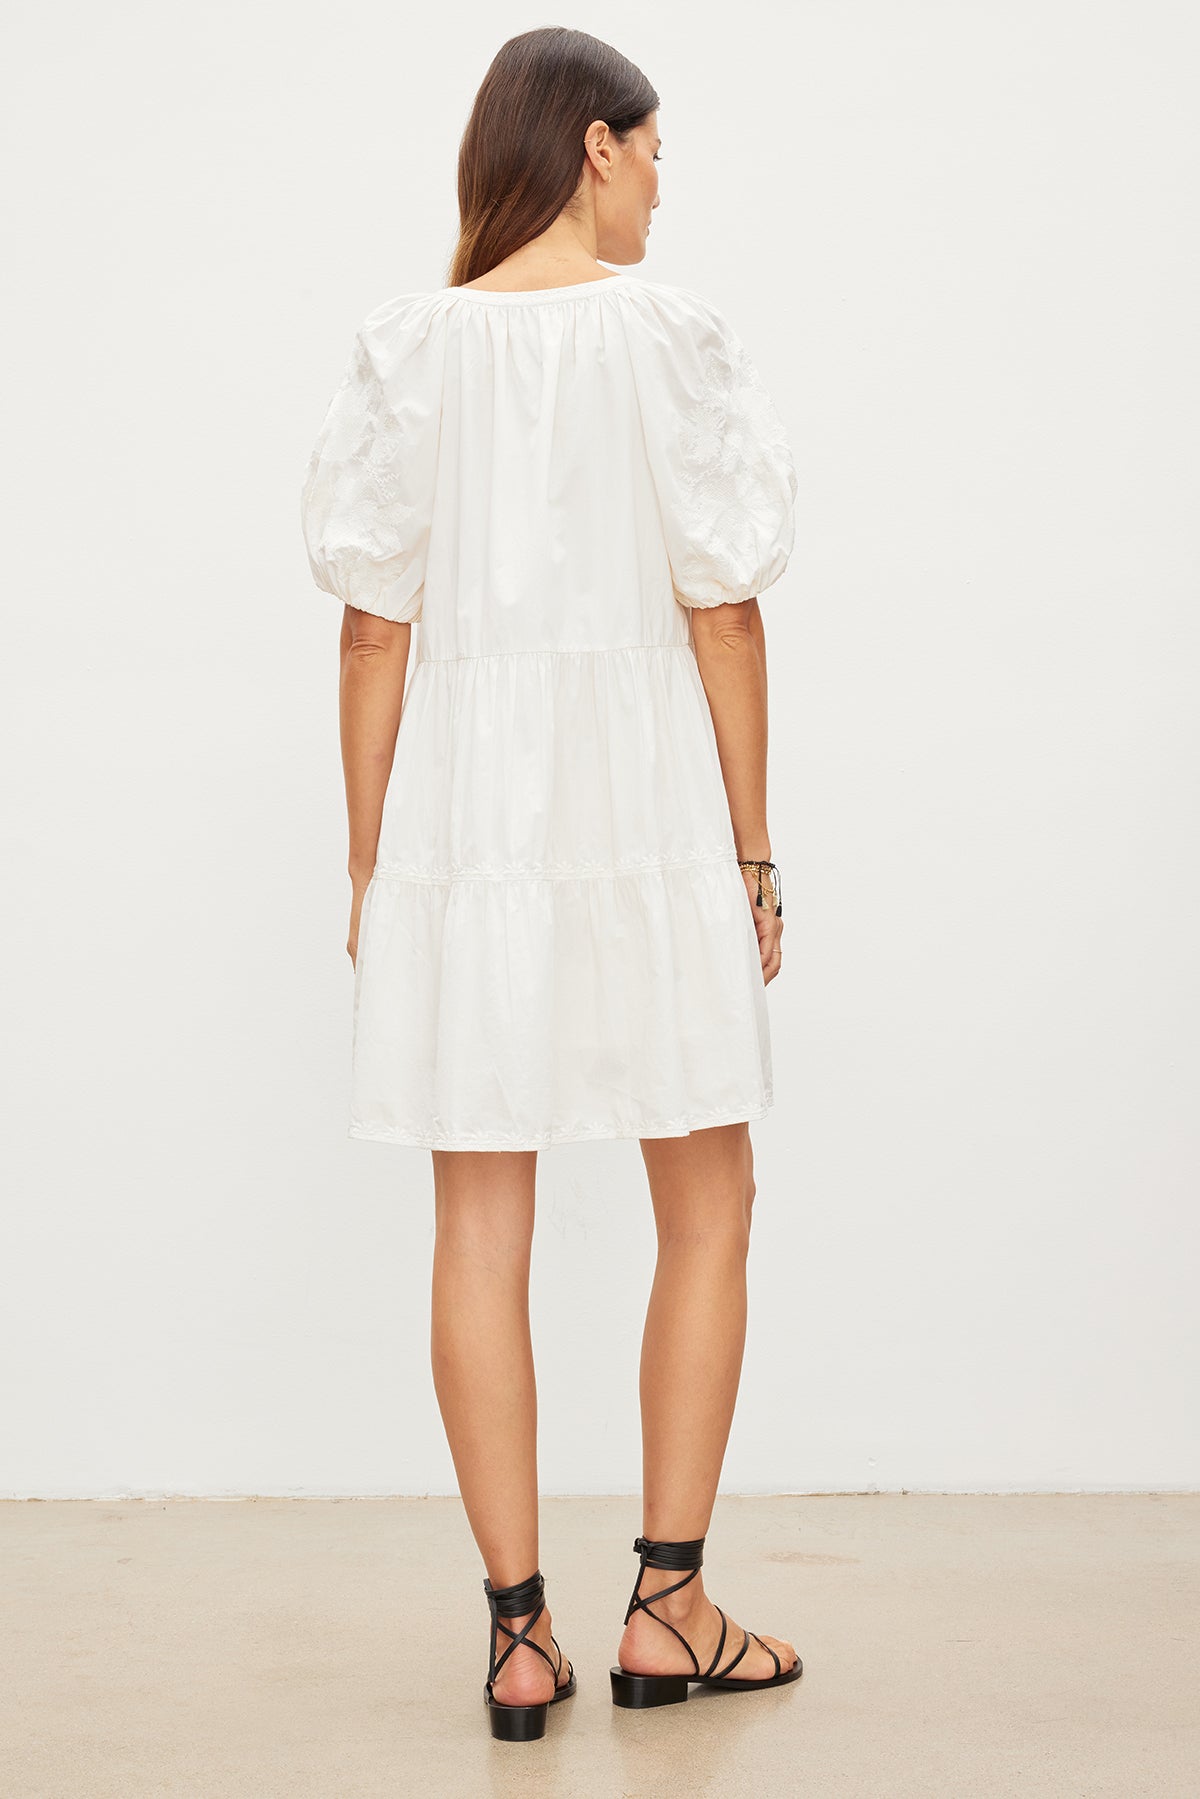   Woman standing with her back to the camera, wearing a white puff-sleeve CHRISSY EMBROIDERED BOHO DRESS by Velvet by Graham & Spencer and black strappy sandals, in a neutral-colored room. 